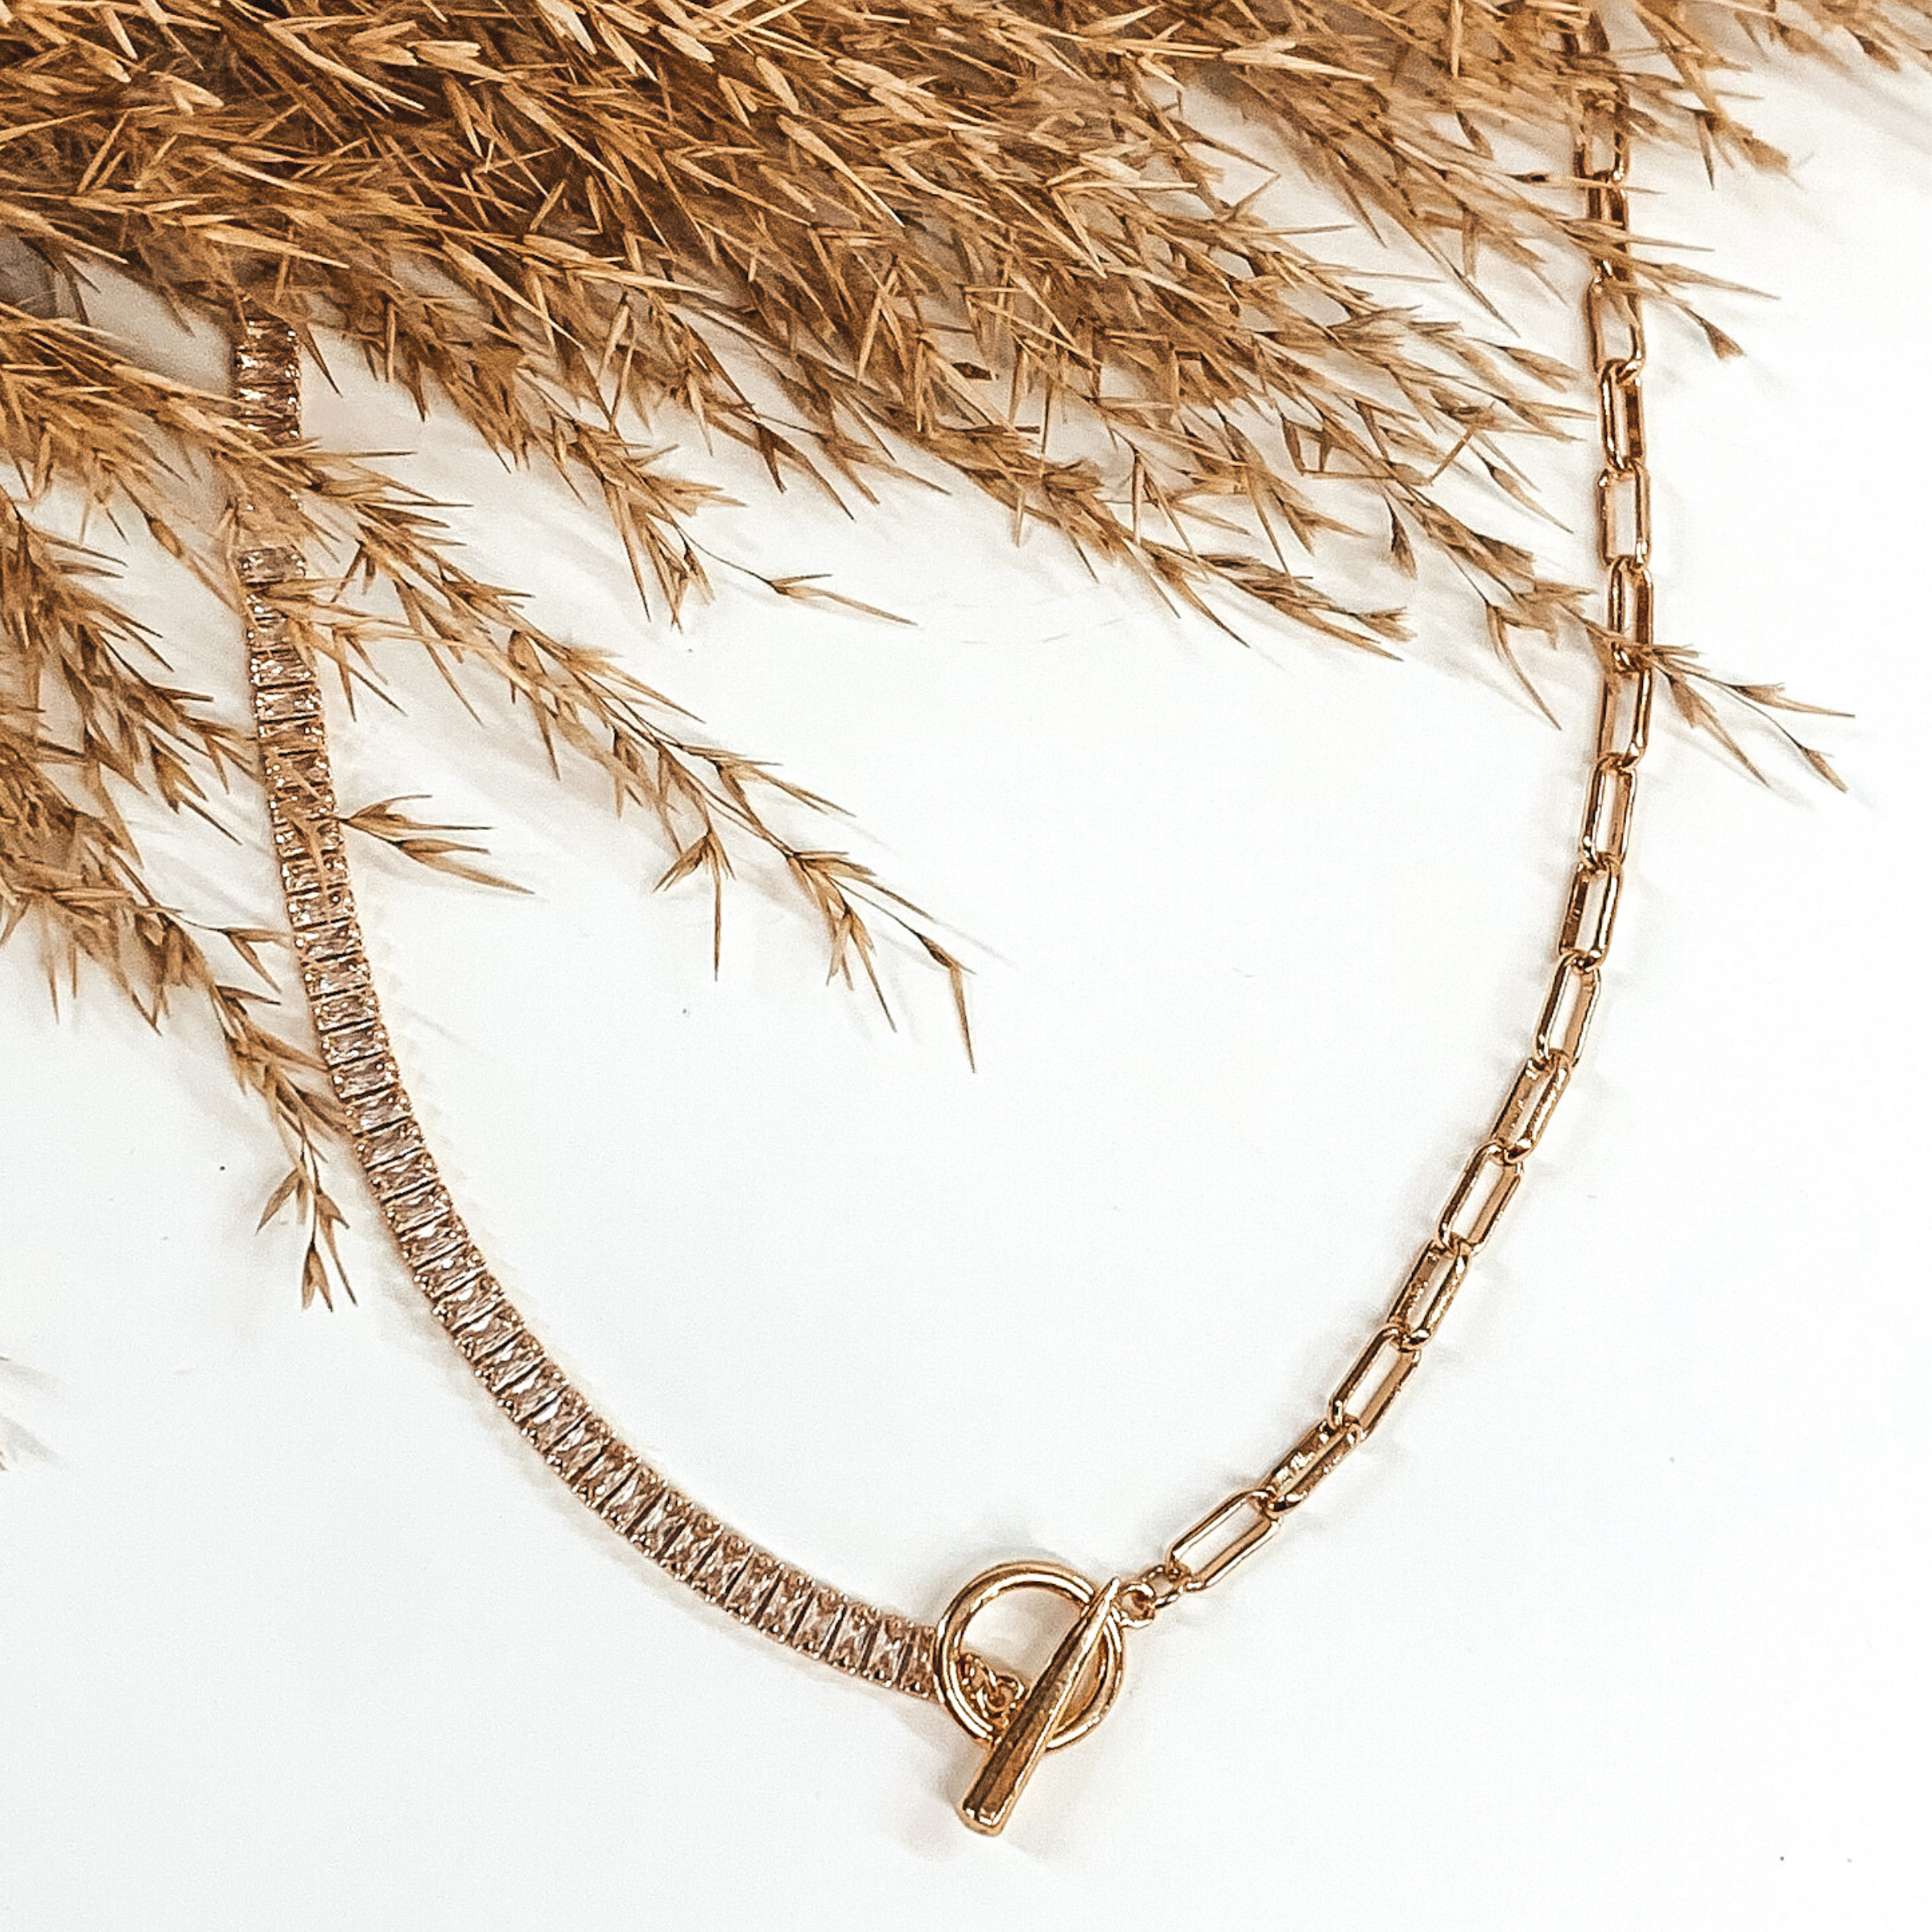 This gold necklace is half clear rhinestones and half thing paperclip chain. There is also a front toggle clasp. This necklace is pictured on a white background with tan floral at the top of the picture.